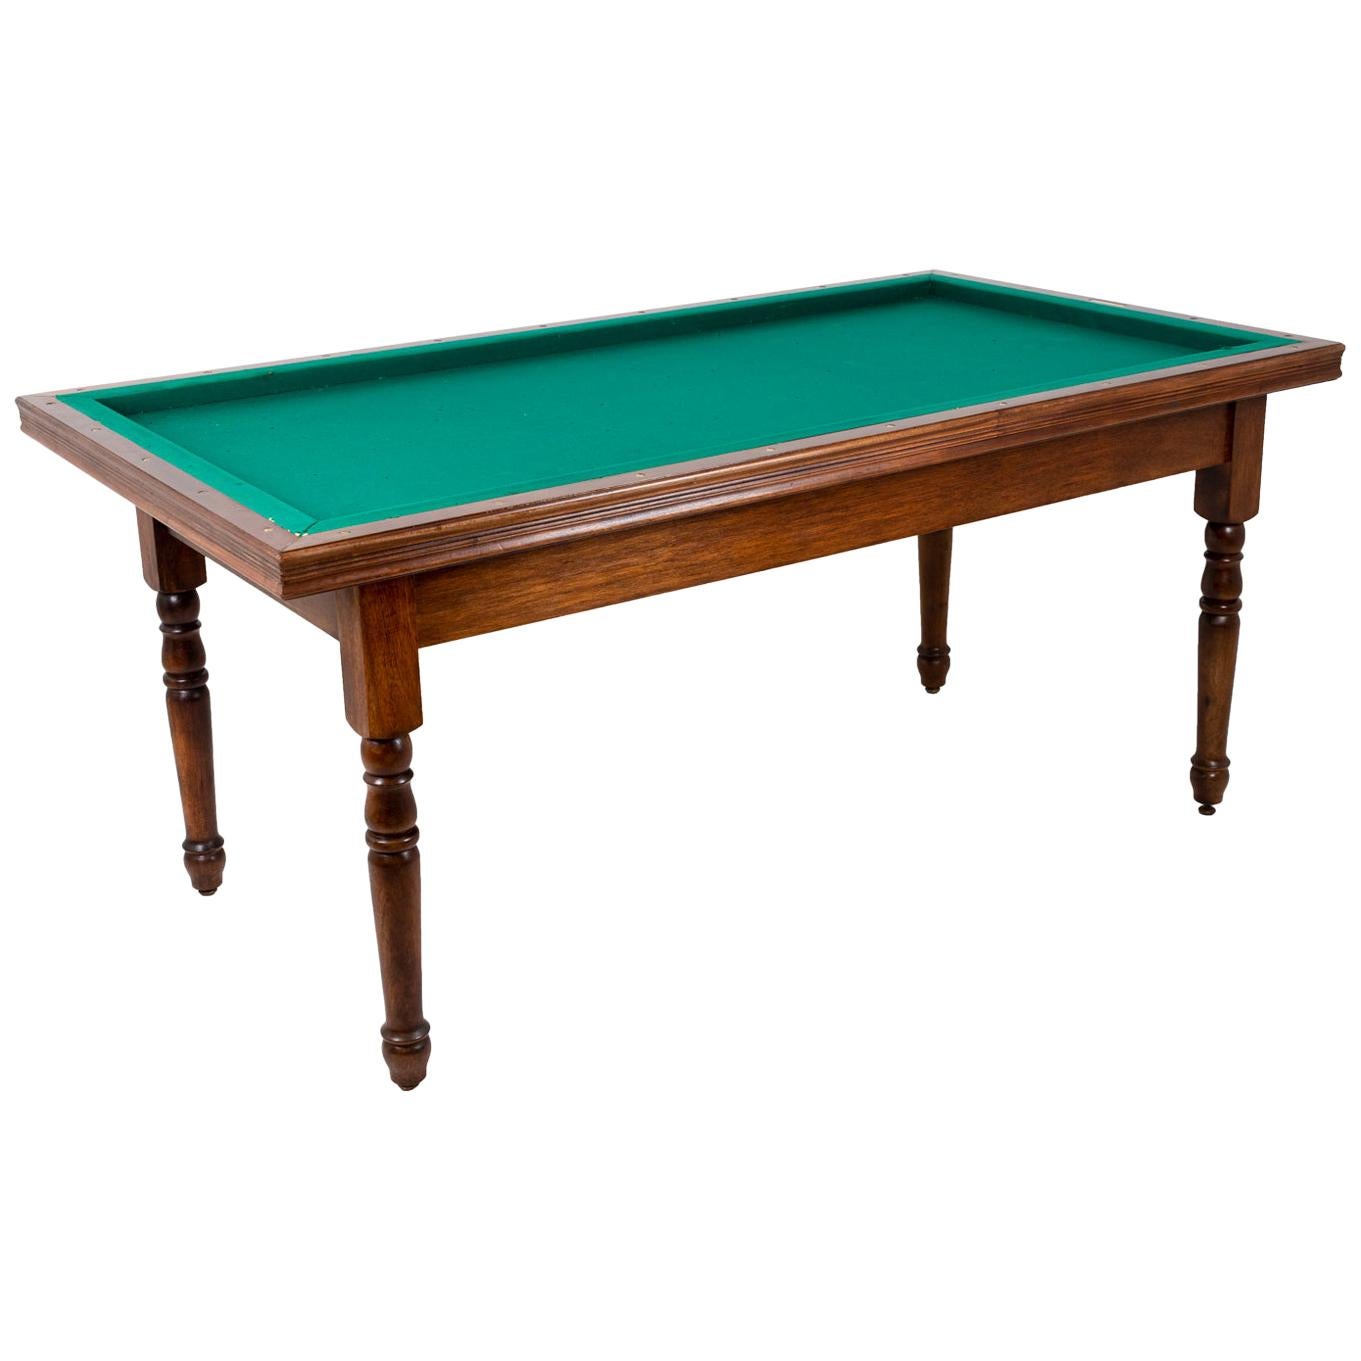 Maison Philippe Malige, Louis-Philippe Style French Billiard Table, 1950s